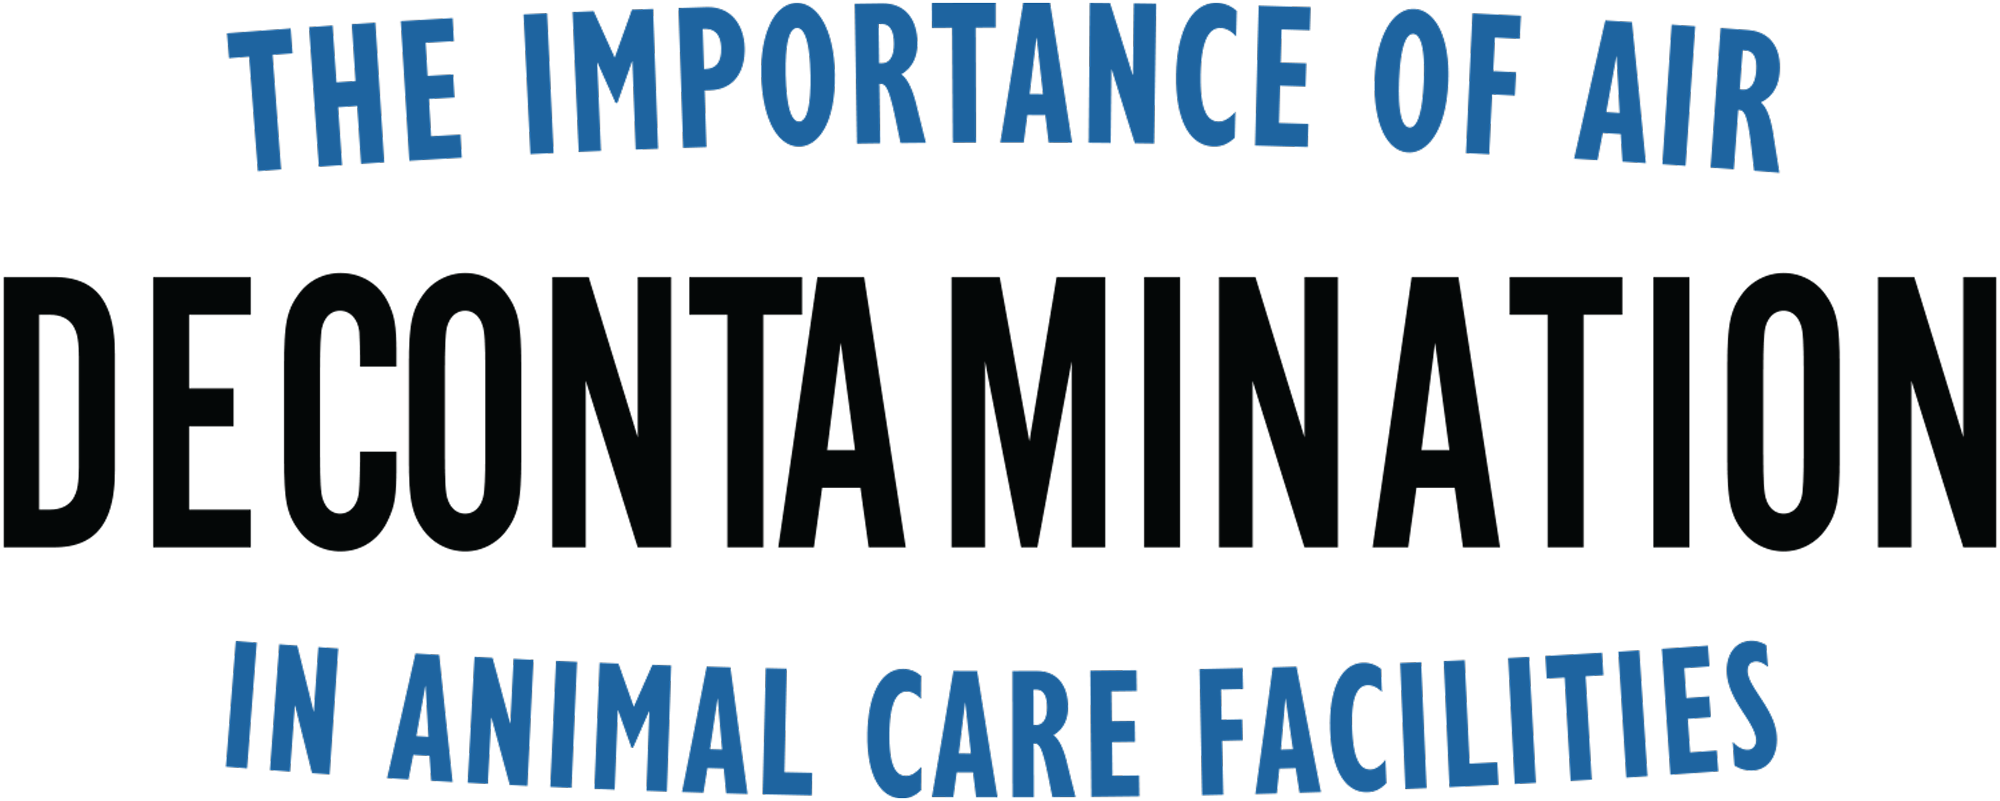 The Importance of Air Decontamination in Animal Care Facilities typography